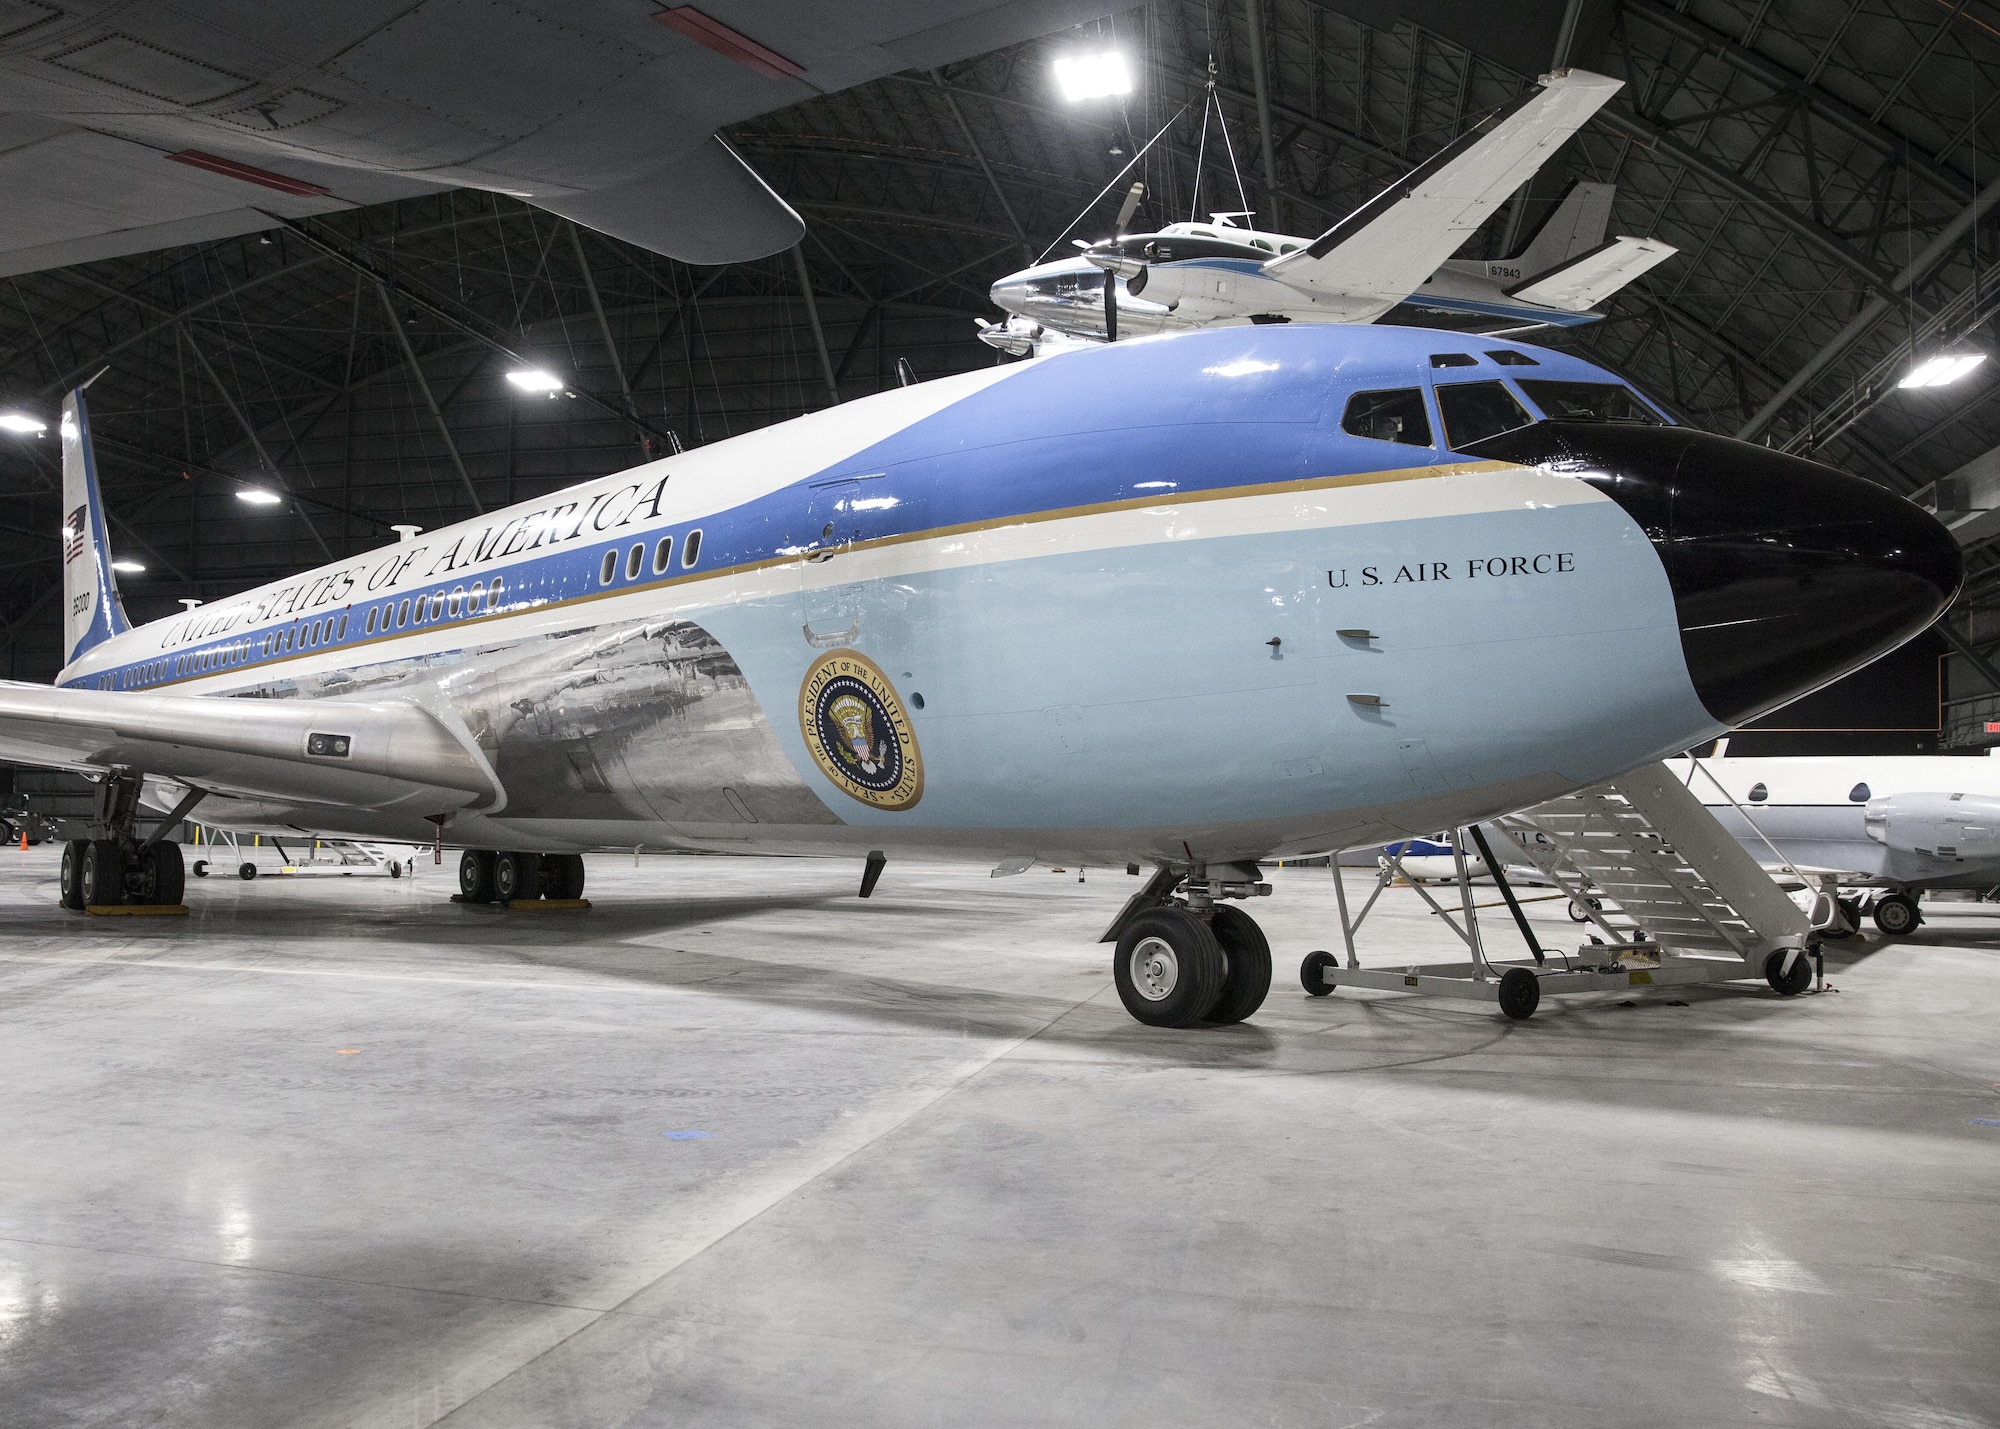 DAYTON, Ohio -- The VC-137C Air Force One (SAM 26000) at the National Museum of the United States Air Force on April 15, 2016. (U.S. Air Force photo by Ken LaRock)